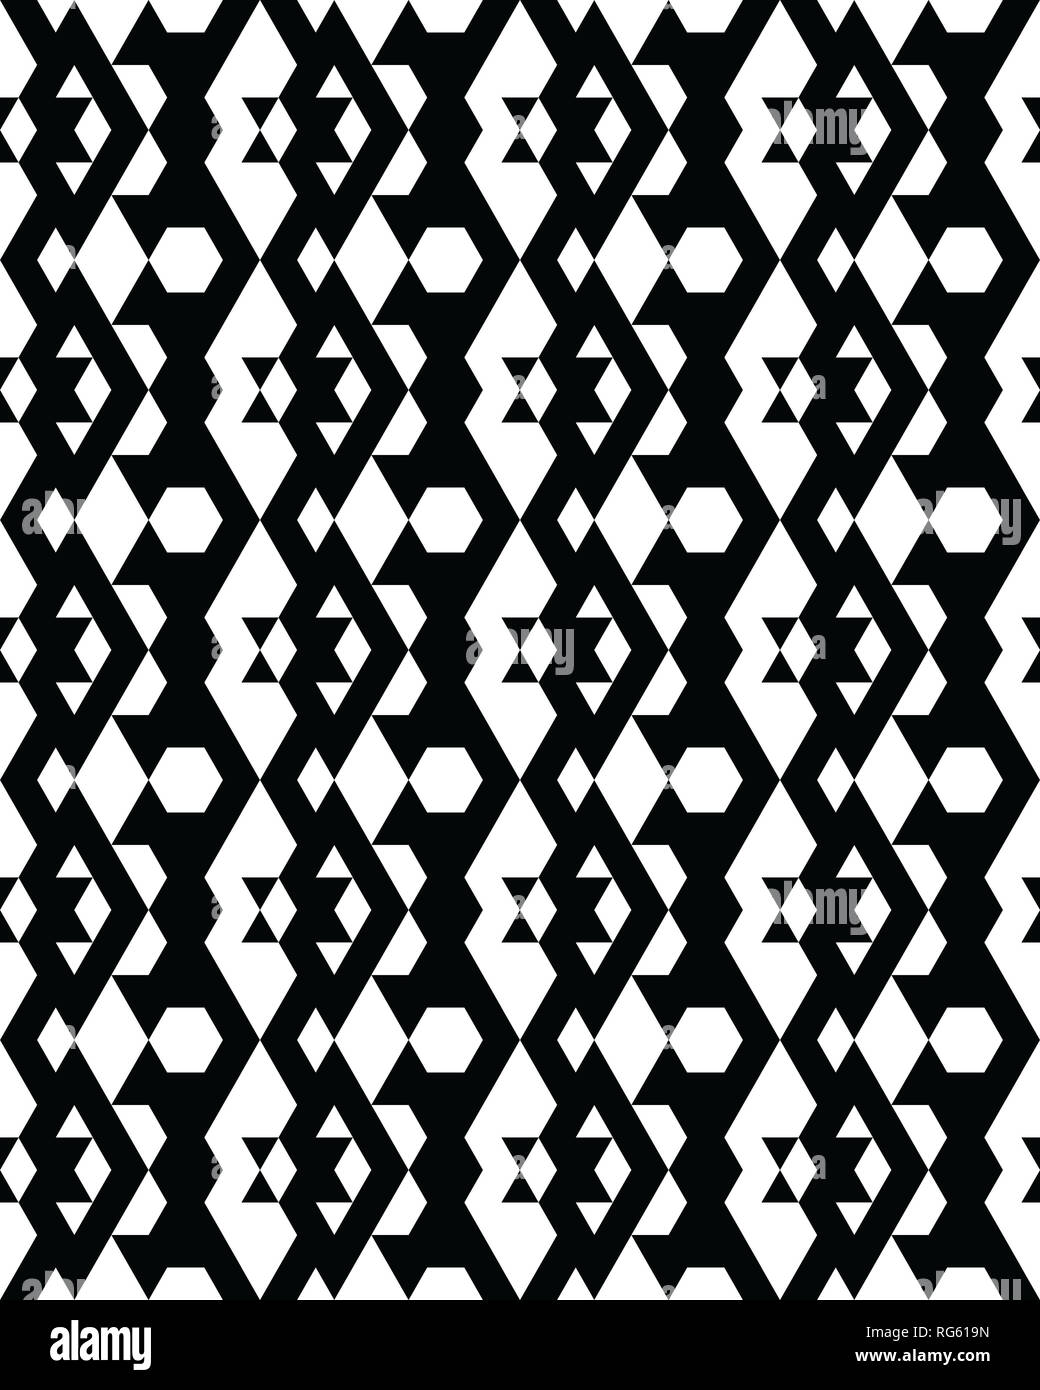 Seamless monochrome geometric patterns, design for packaging, print, covers, cards, wrapping, fabric, paper, interior Stock Photo